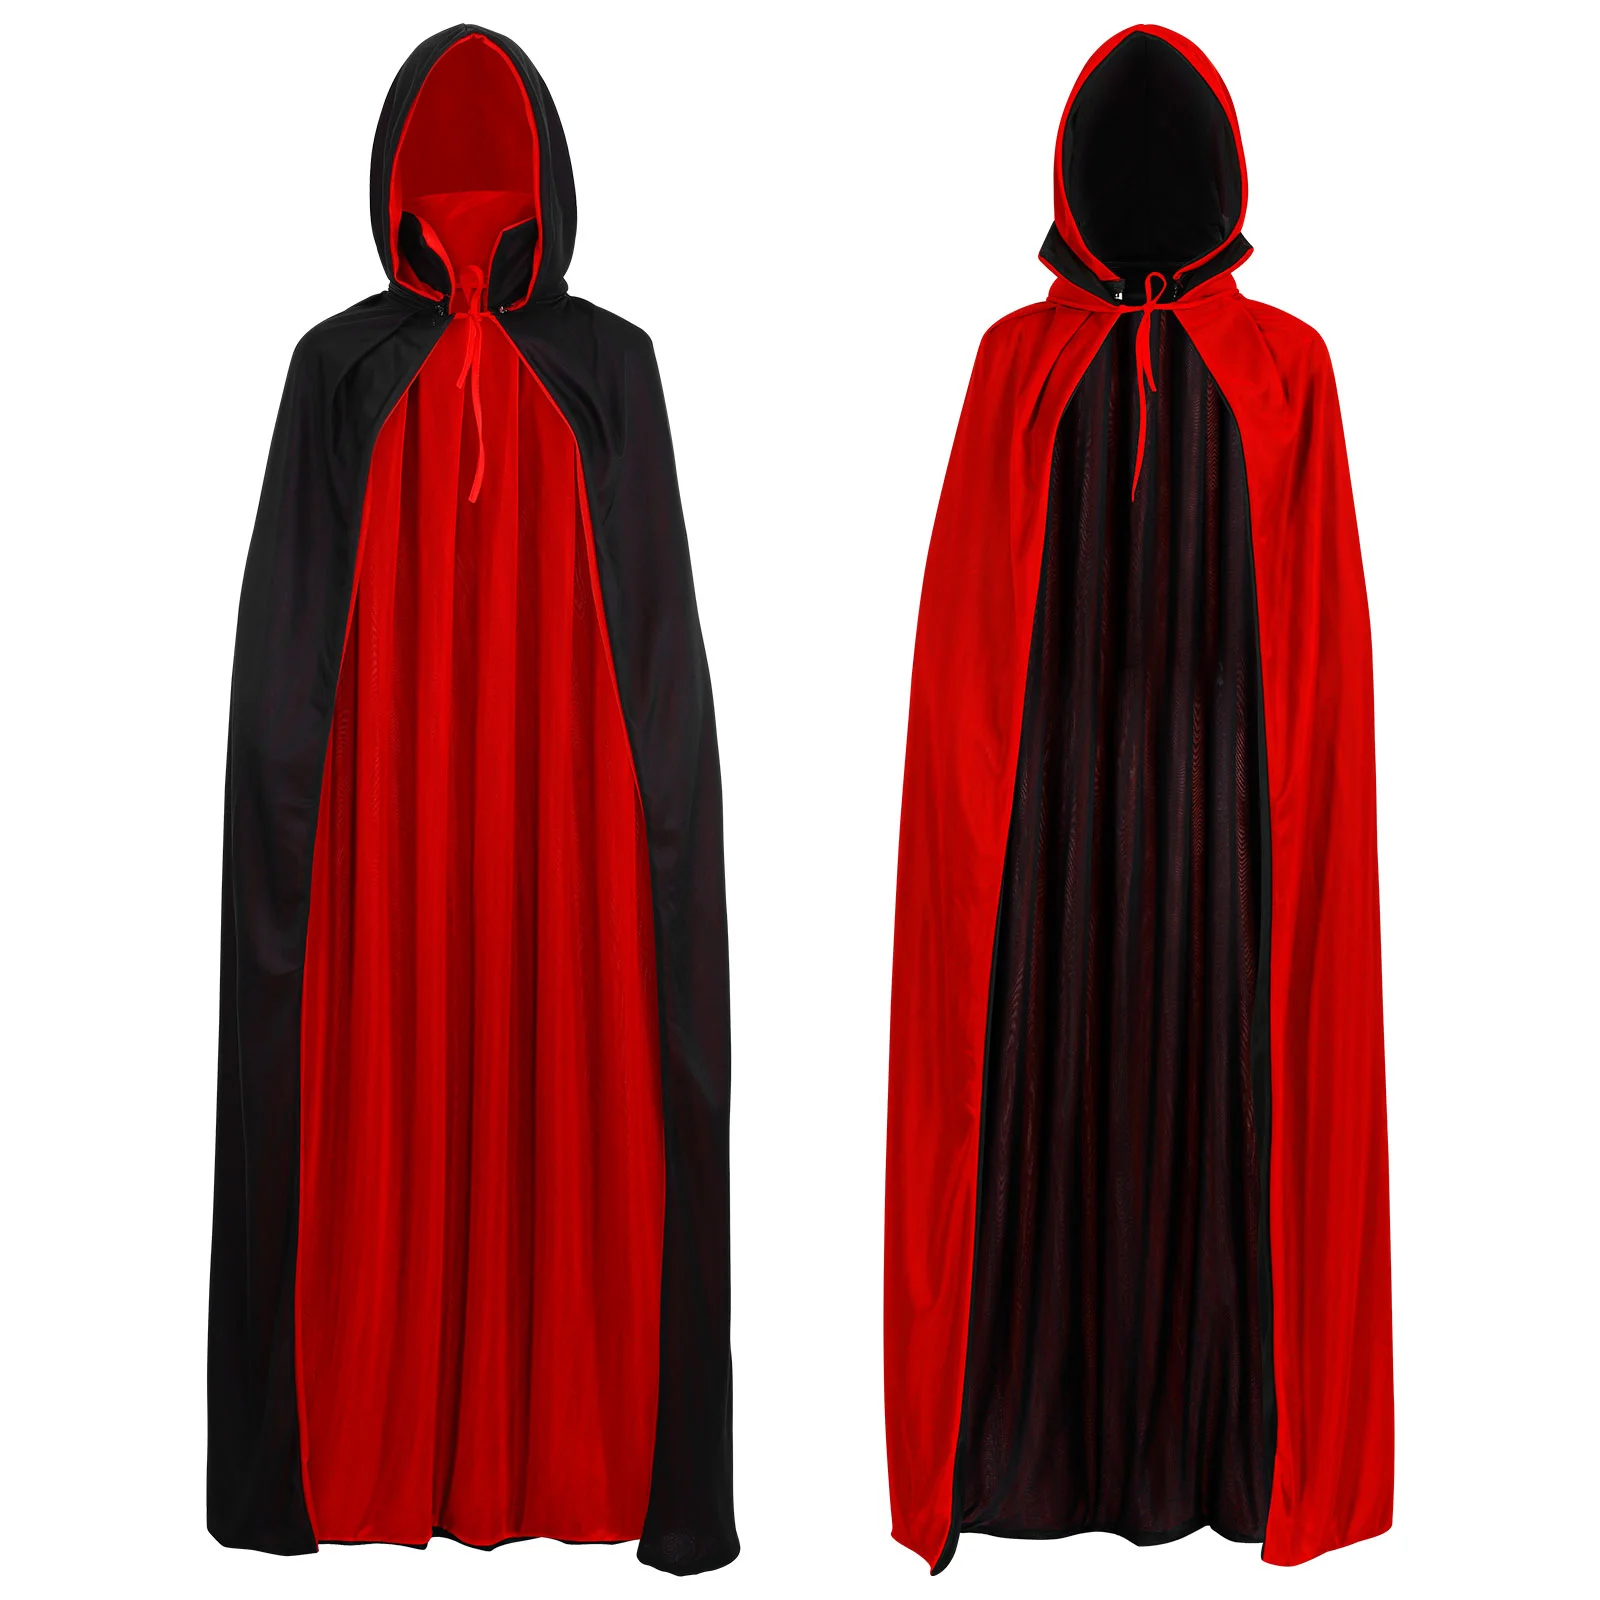 

NOLITOY Halloween Vampire Cloak Costume Party Cape Hooded Cloak Masquerade Cosplay Witch Cloak Reversible Cape